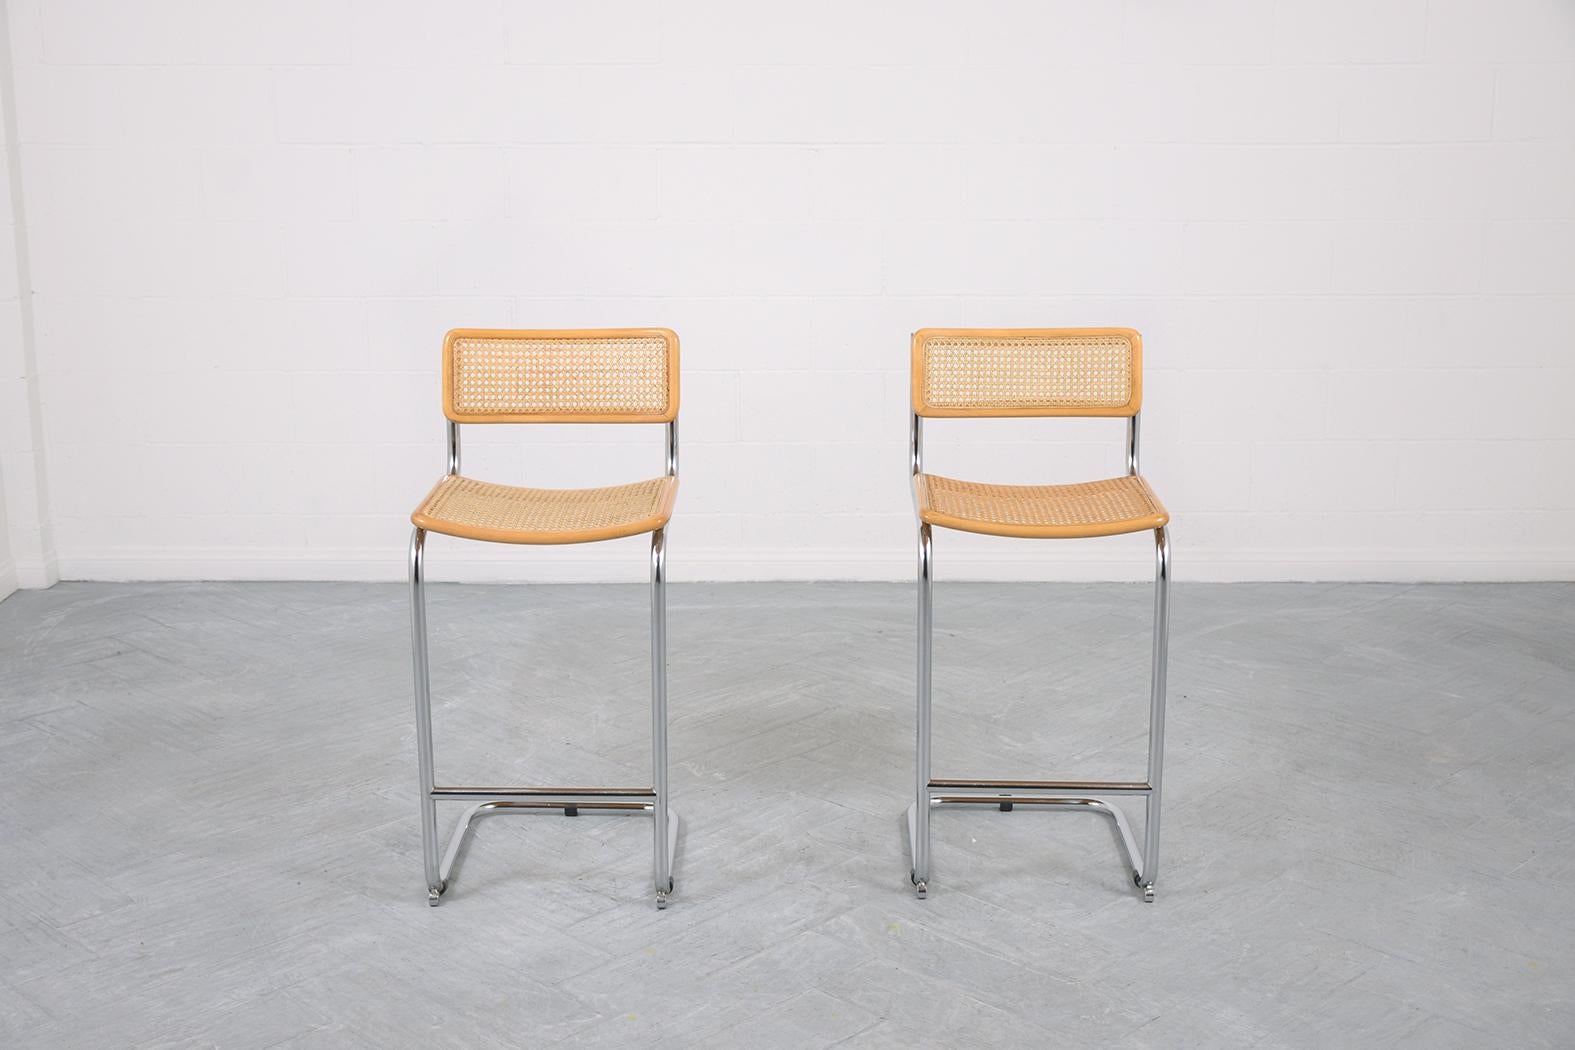 These extraordinary pair of mid-century barstools from Marcel Breuer are in great condition and have been newly restored by our team of expert craftsmen. The frames are beautifully hand-crafted out of steel, this pair is eye-catching and features a